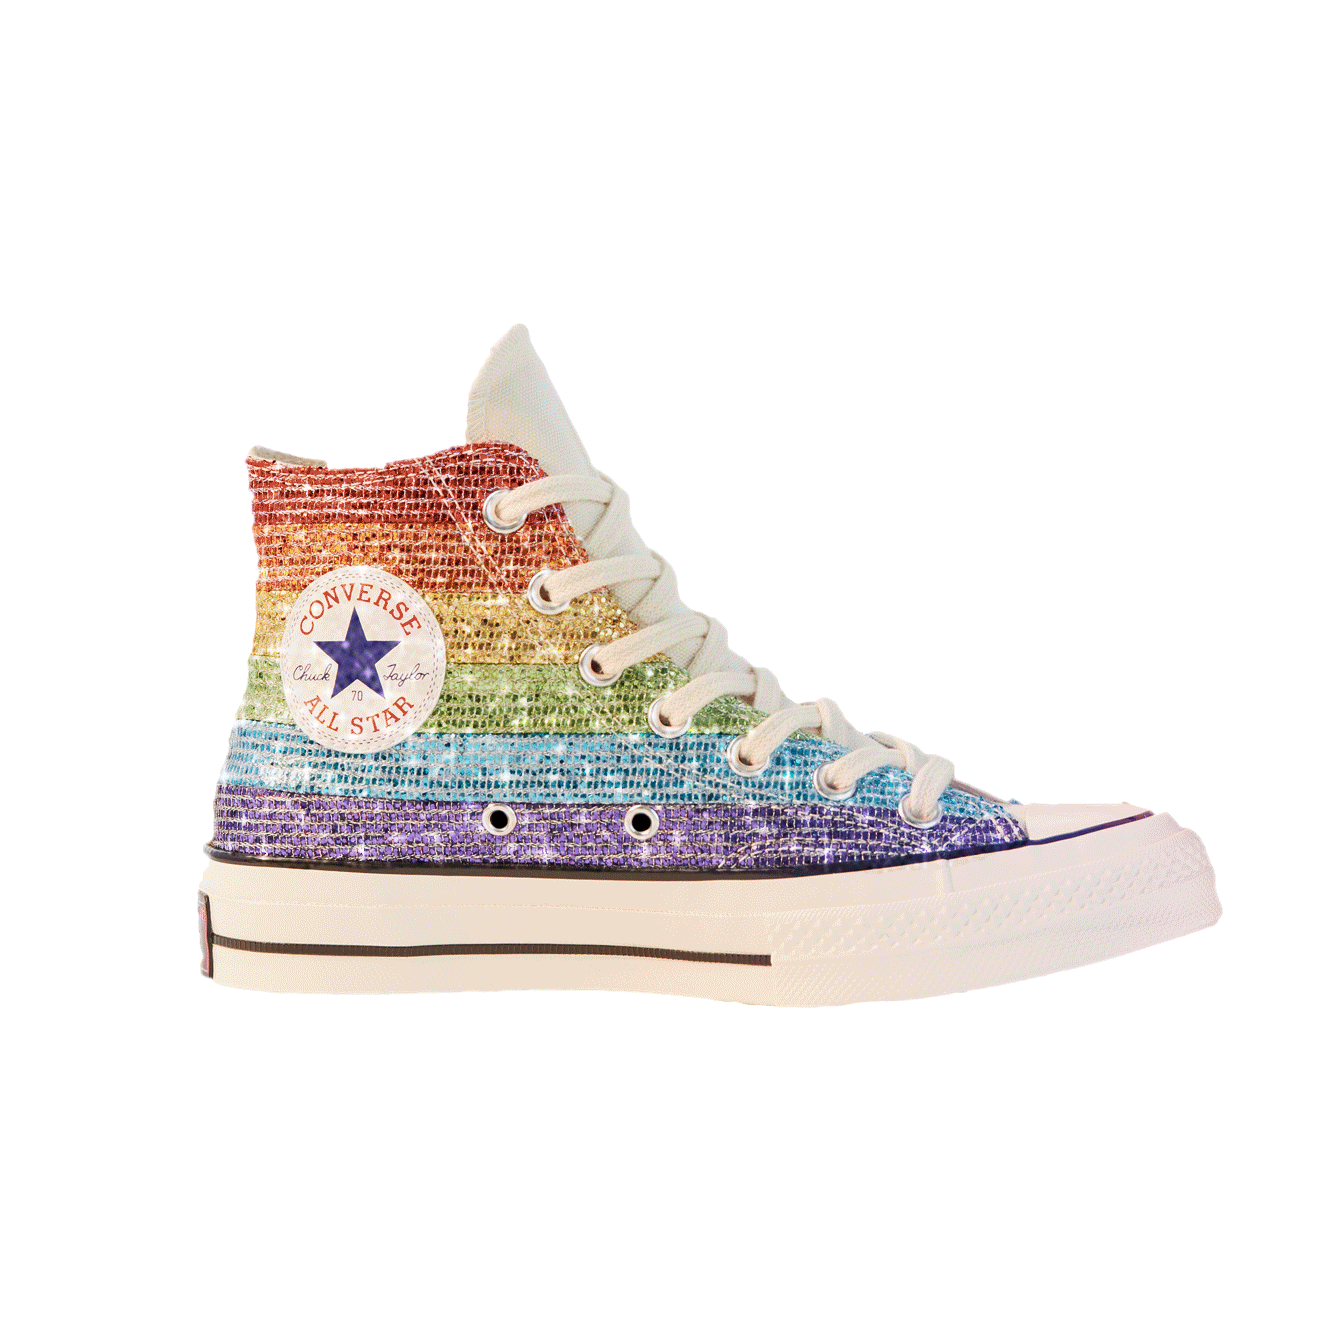 Converse Hannah Montana Sticker by Miley Cyrus for iOS \u0026 Android | GIPHY